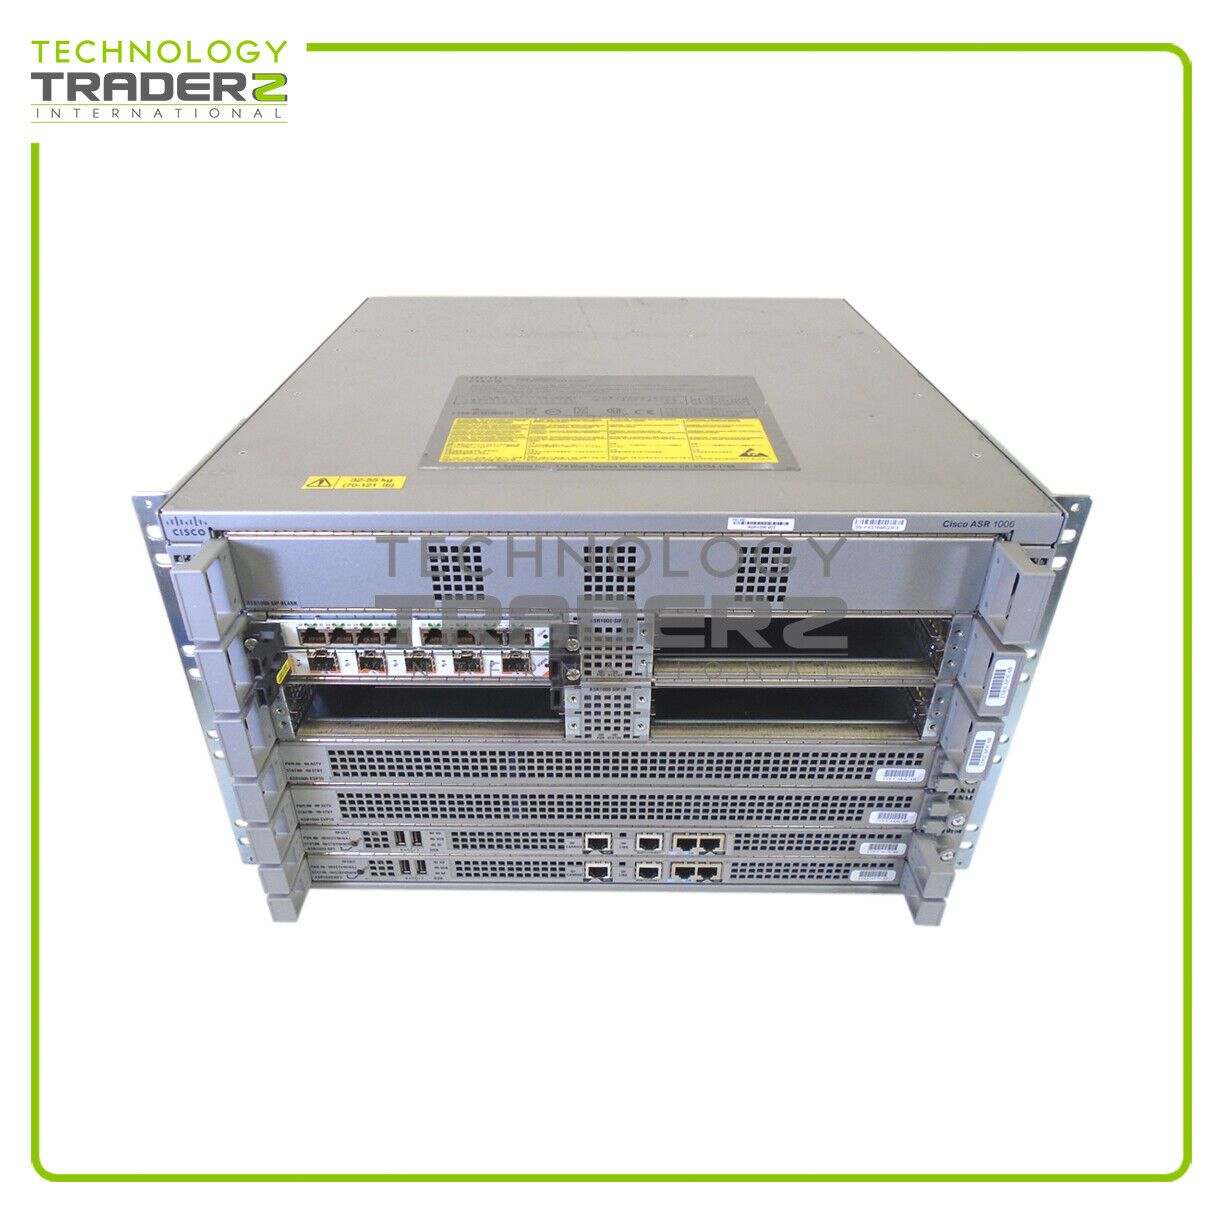 ASR1006 V03 Cisco ASR1000 6-Slots Router Chassis W/ 2x PWS 2x IPM 2x Embedded